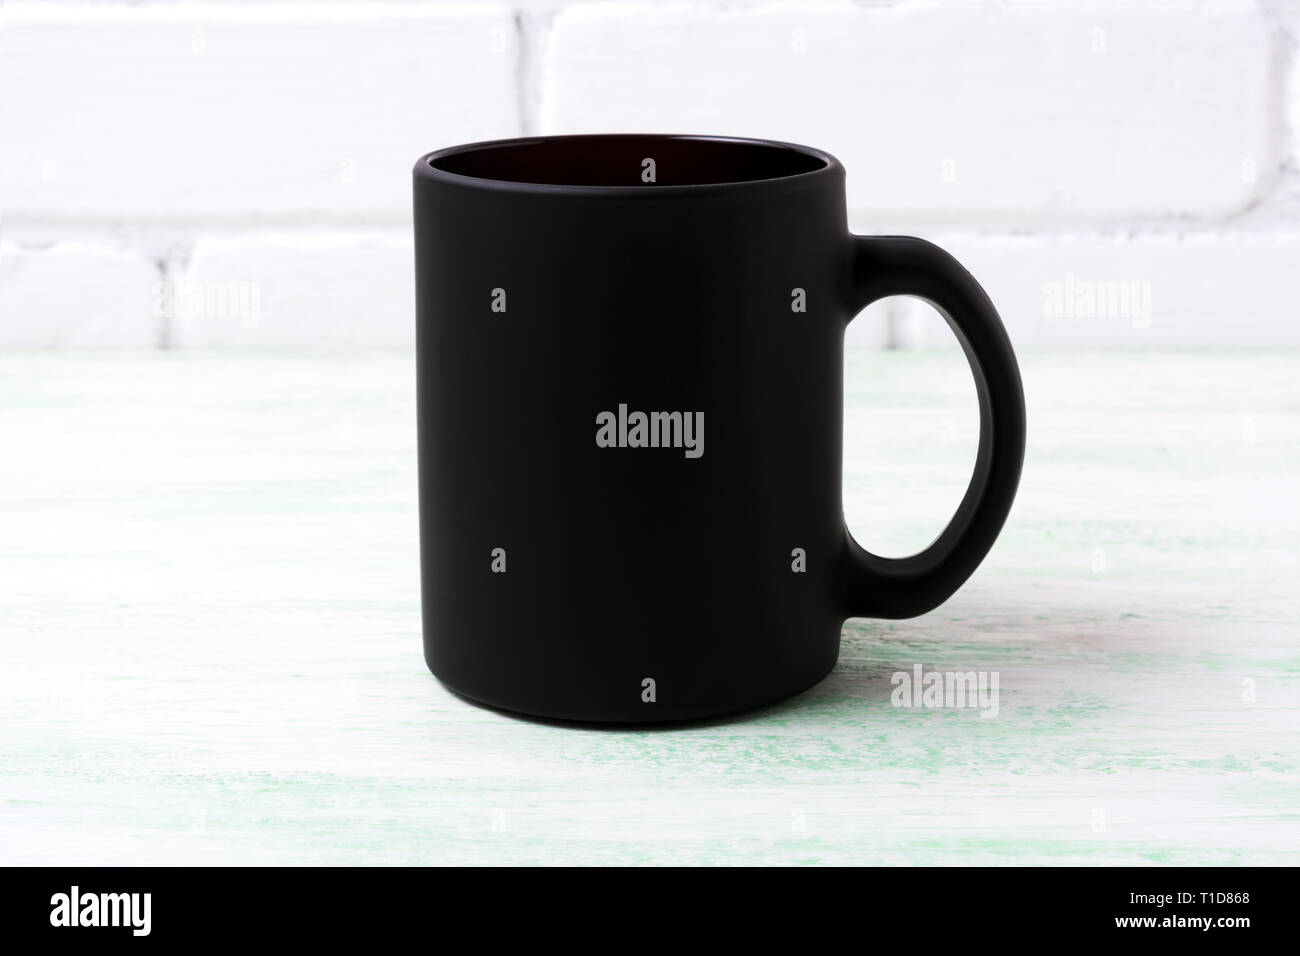 https://c8.alamy.com/comp/T1D868/black-coffee-mug-mockup-with-white-painted-brick-wall-empty-mug-mock-up-for-brand-promotion-T1D868.jpg